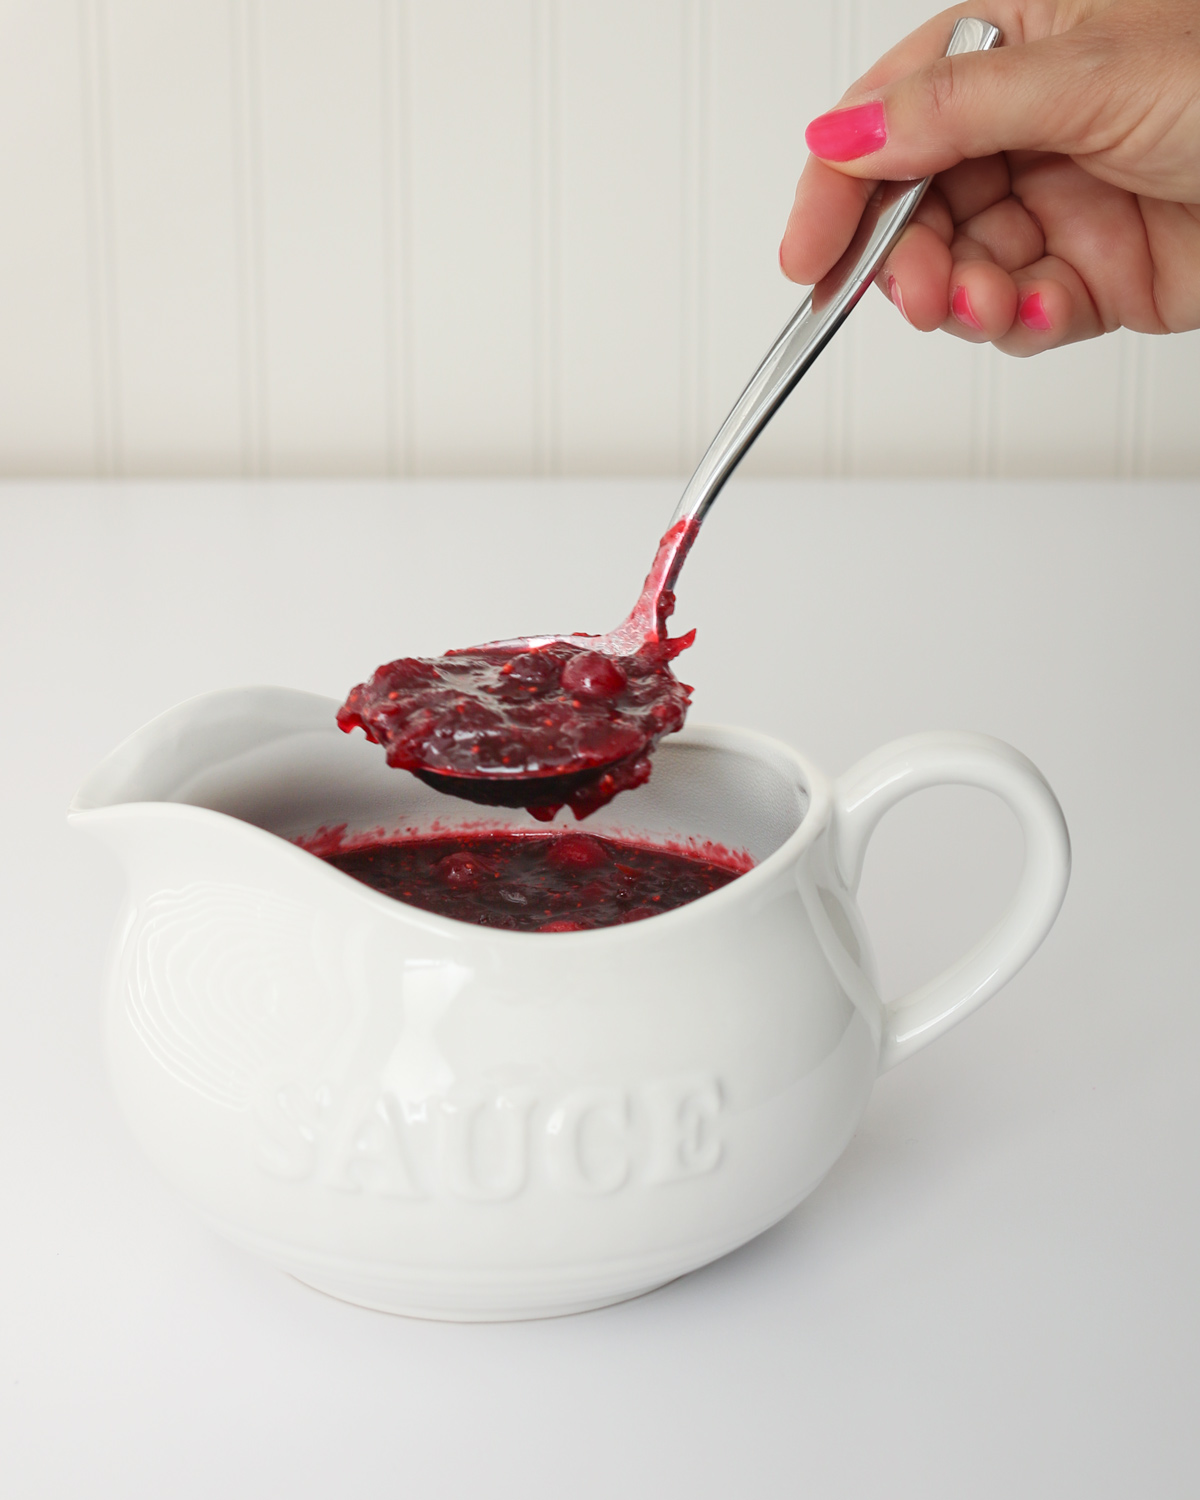 ladling cranberry sauce from a white sauce boat.